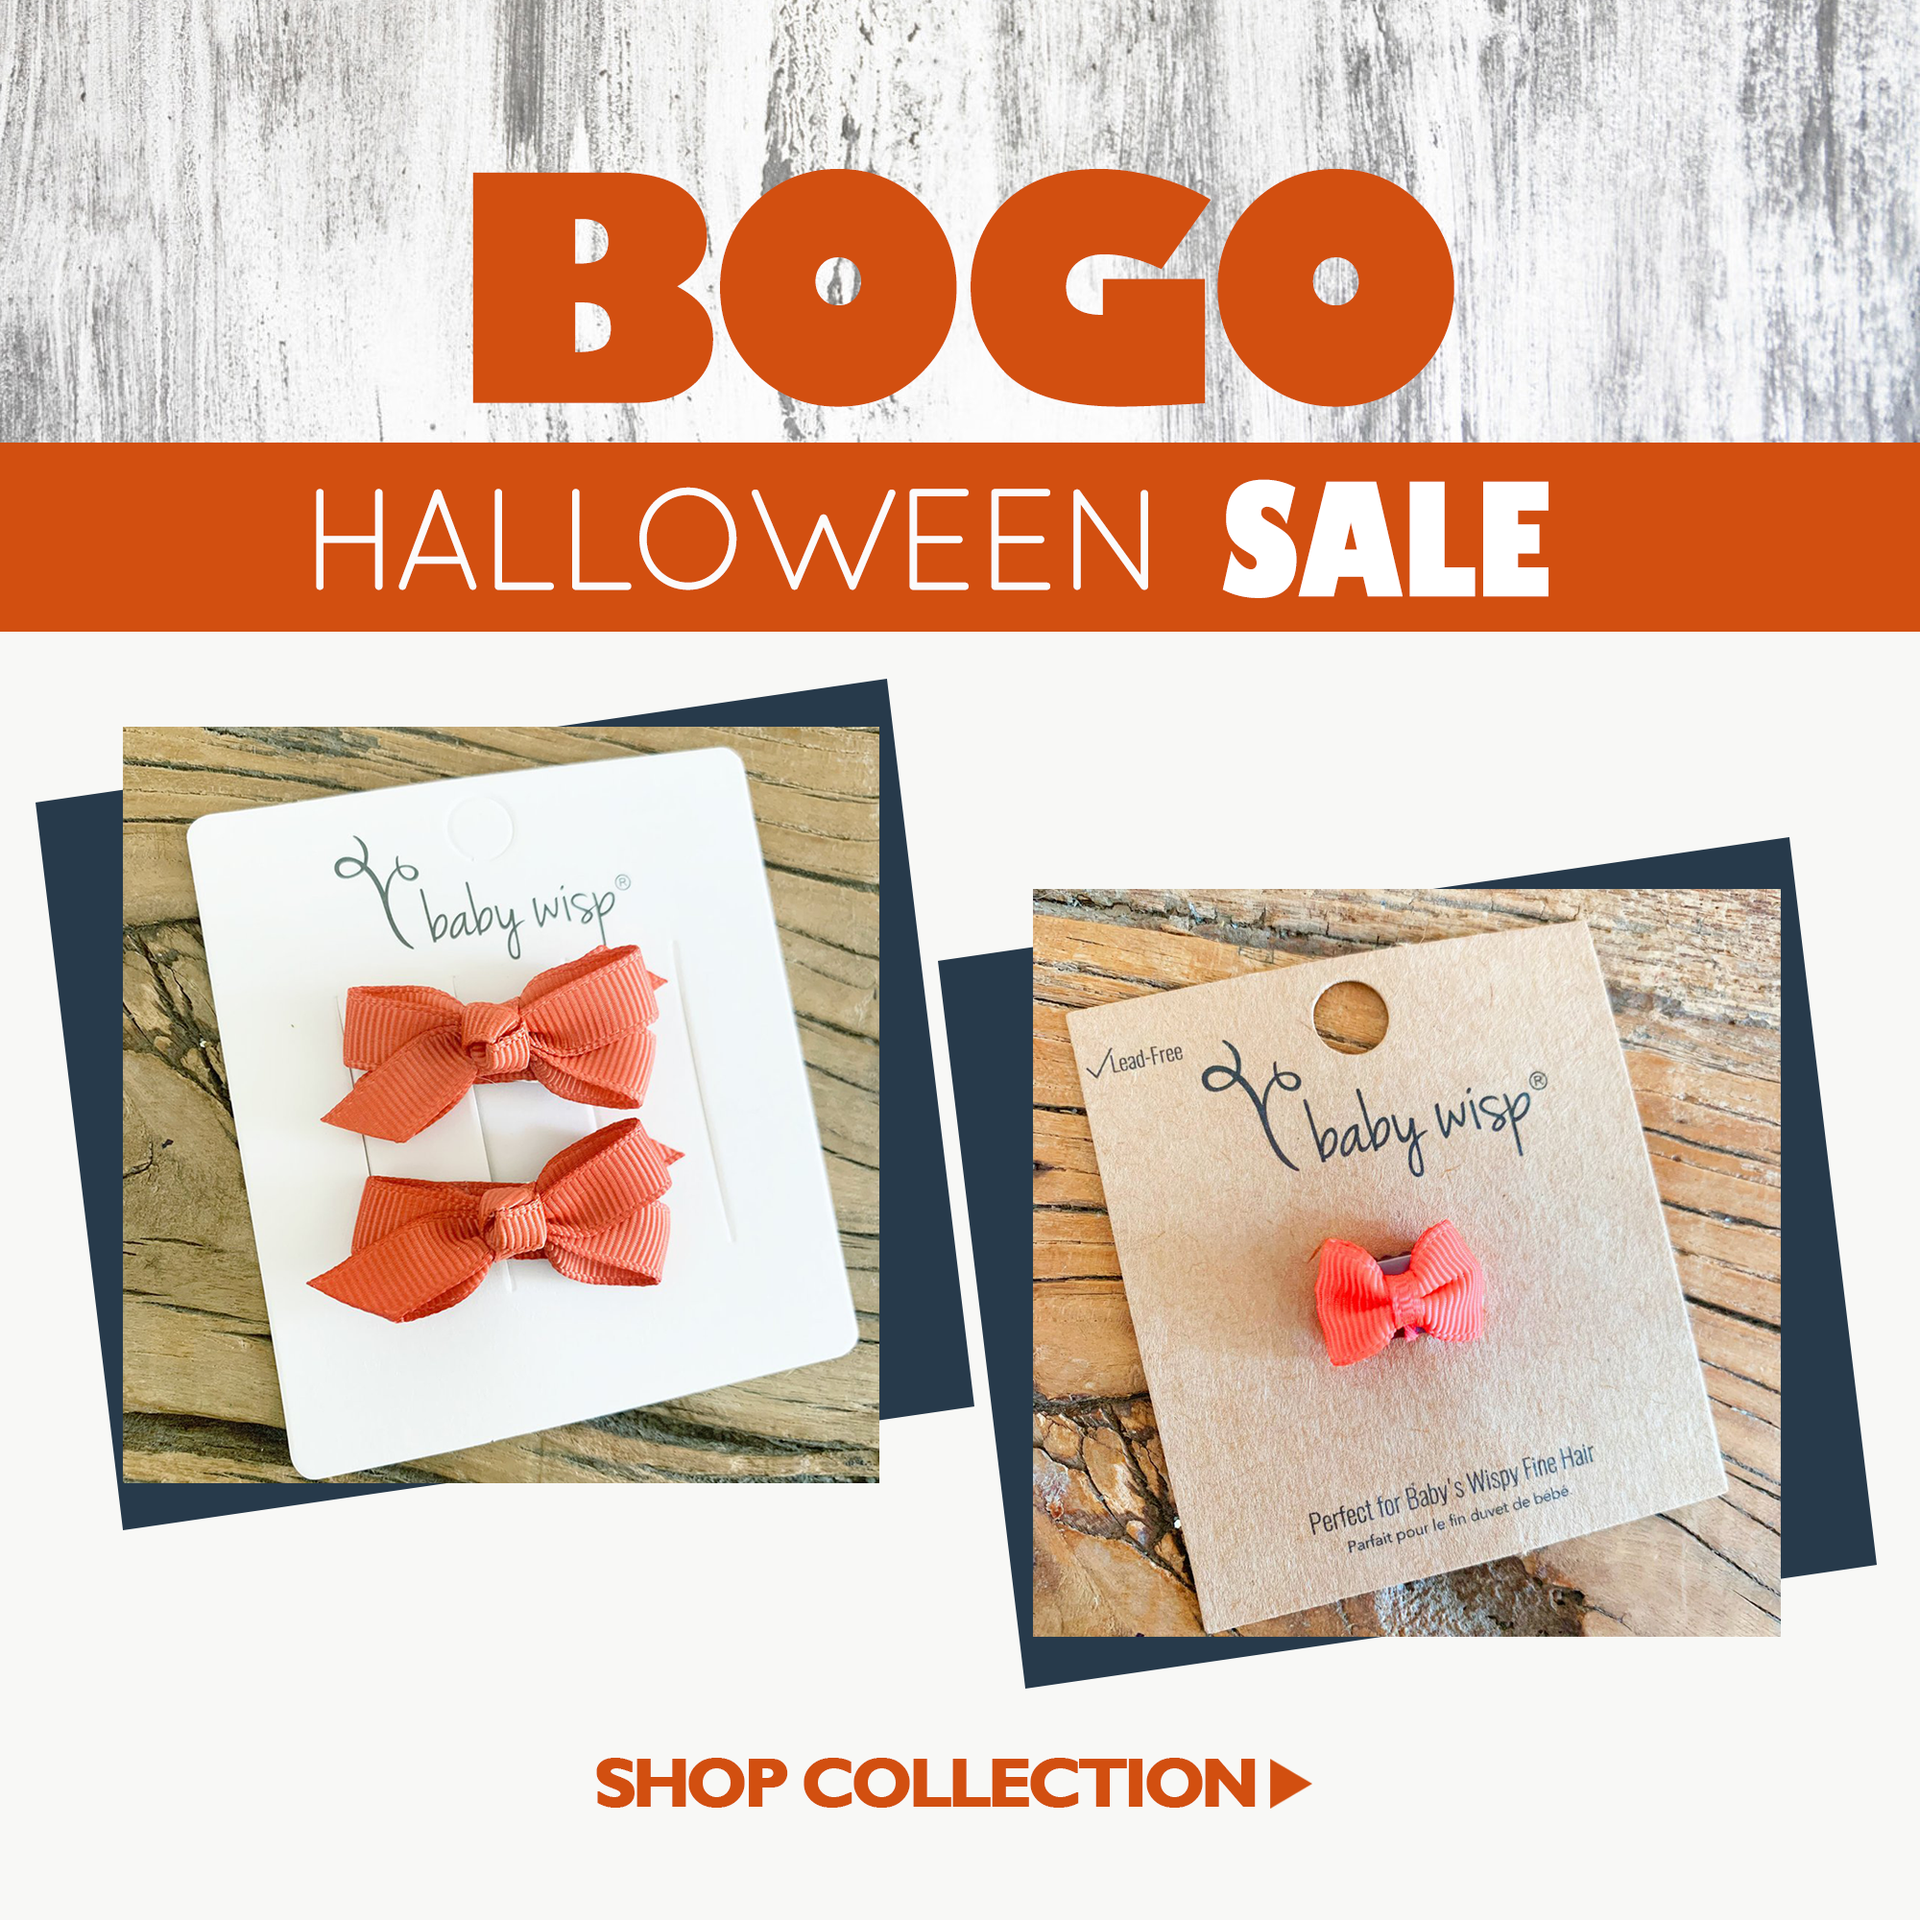 Buy One, Get One FREE* Halloween Accessories!